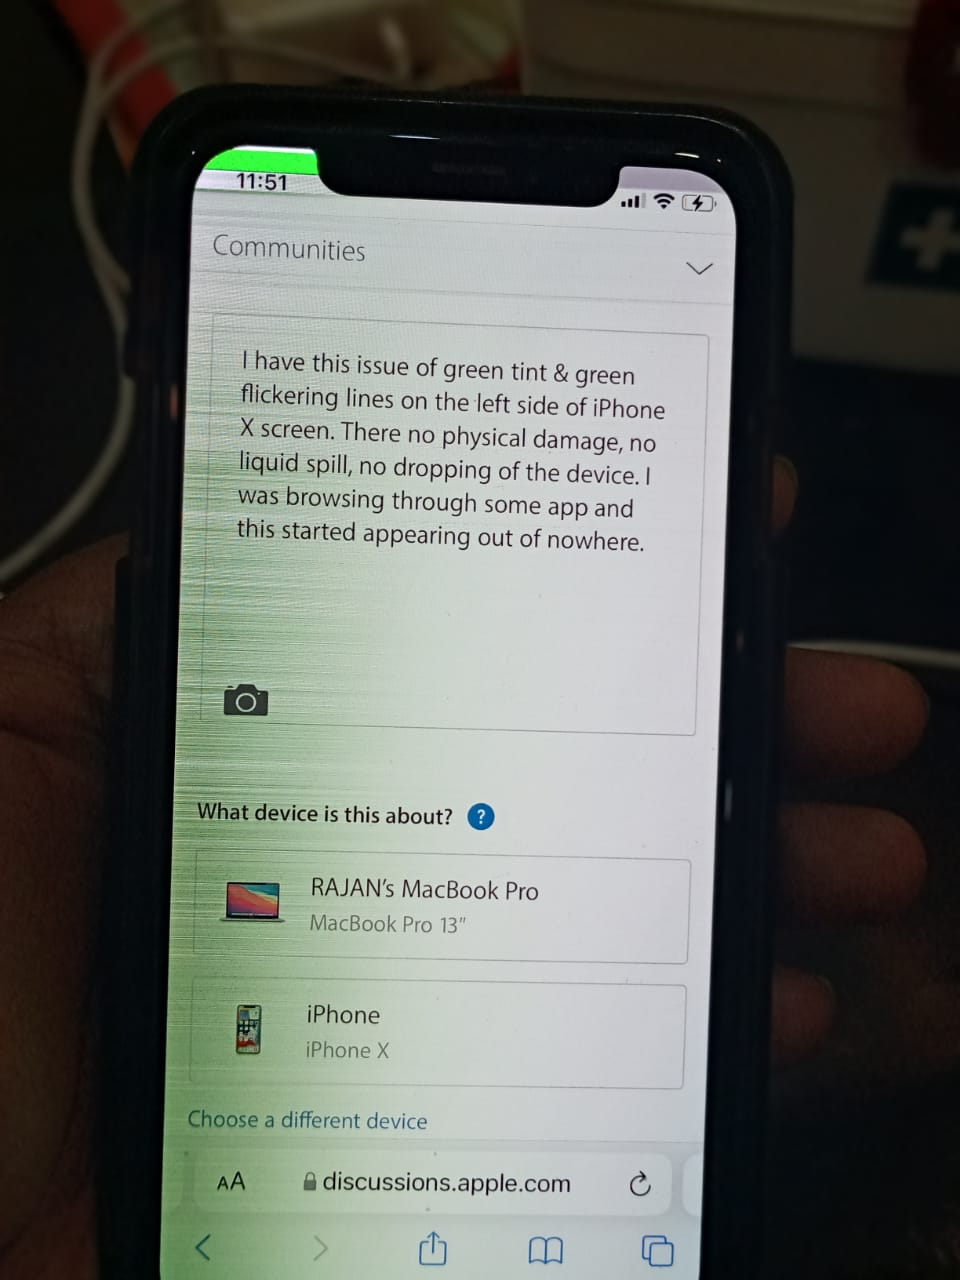 iPhone Screen Is Glitching & Flickering! How to Fix iPhone Screen Glitch  Issue? 